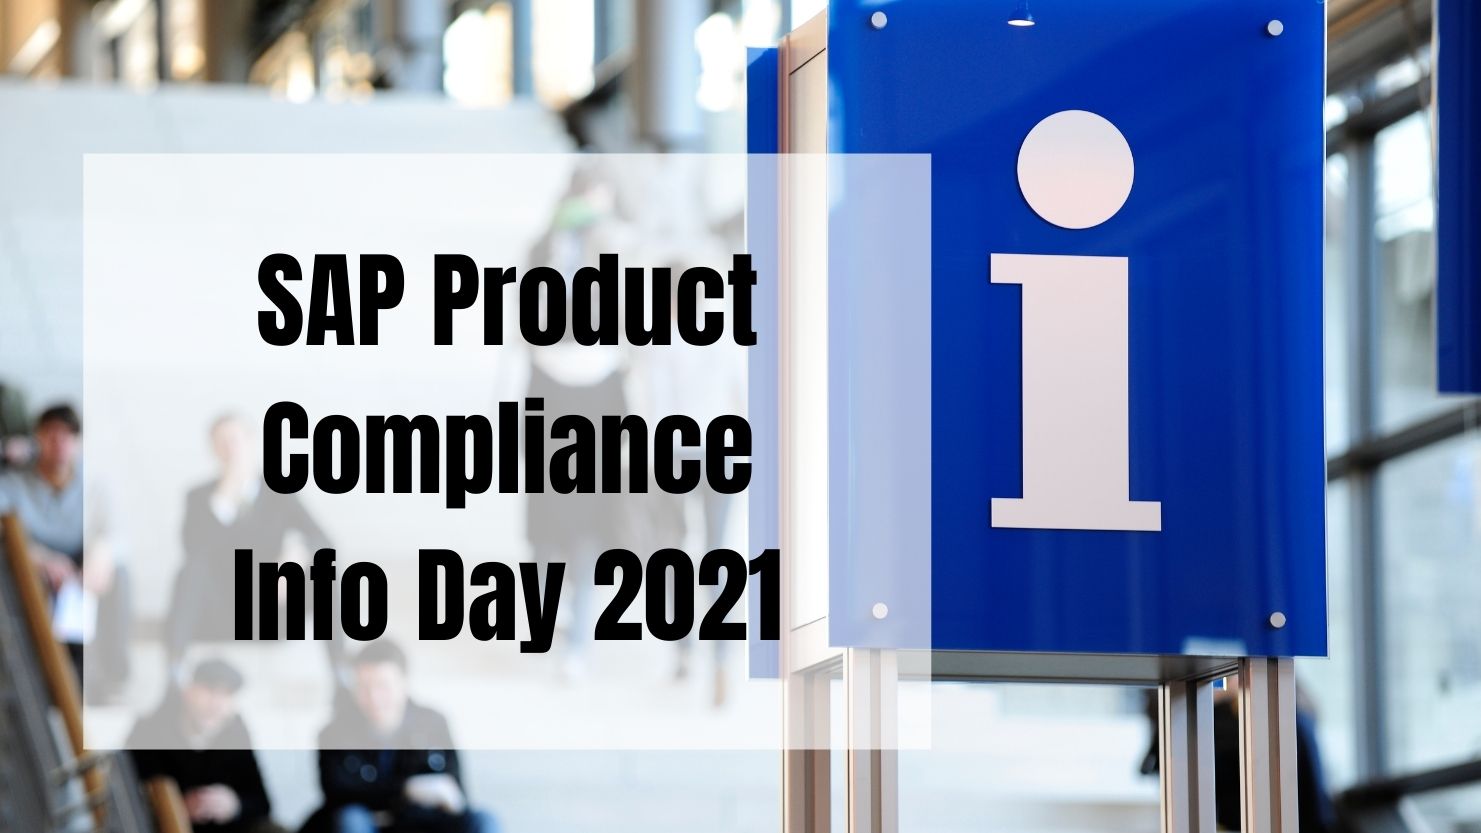 SAP Product Compliance Info Day Nov 2021